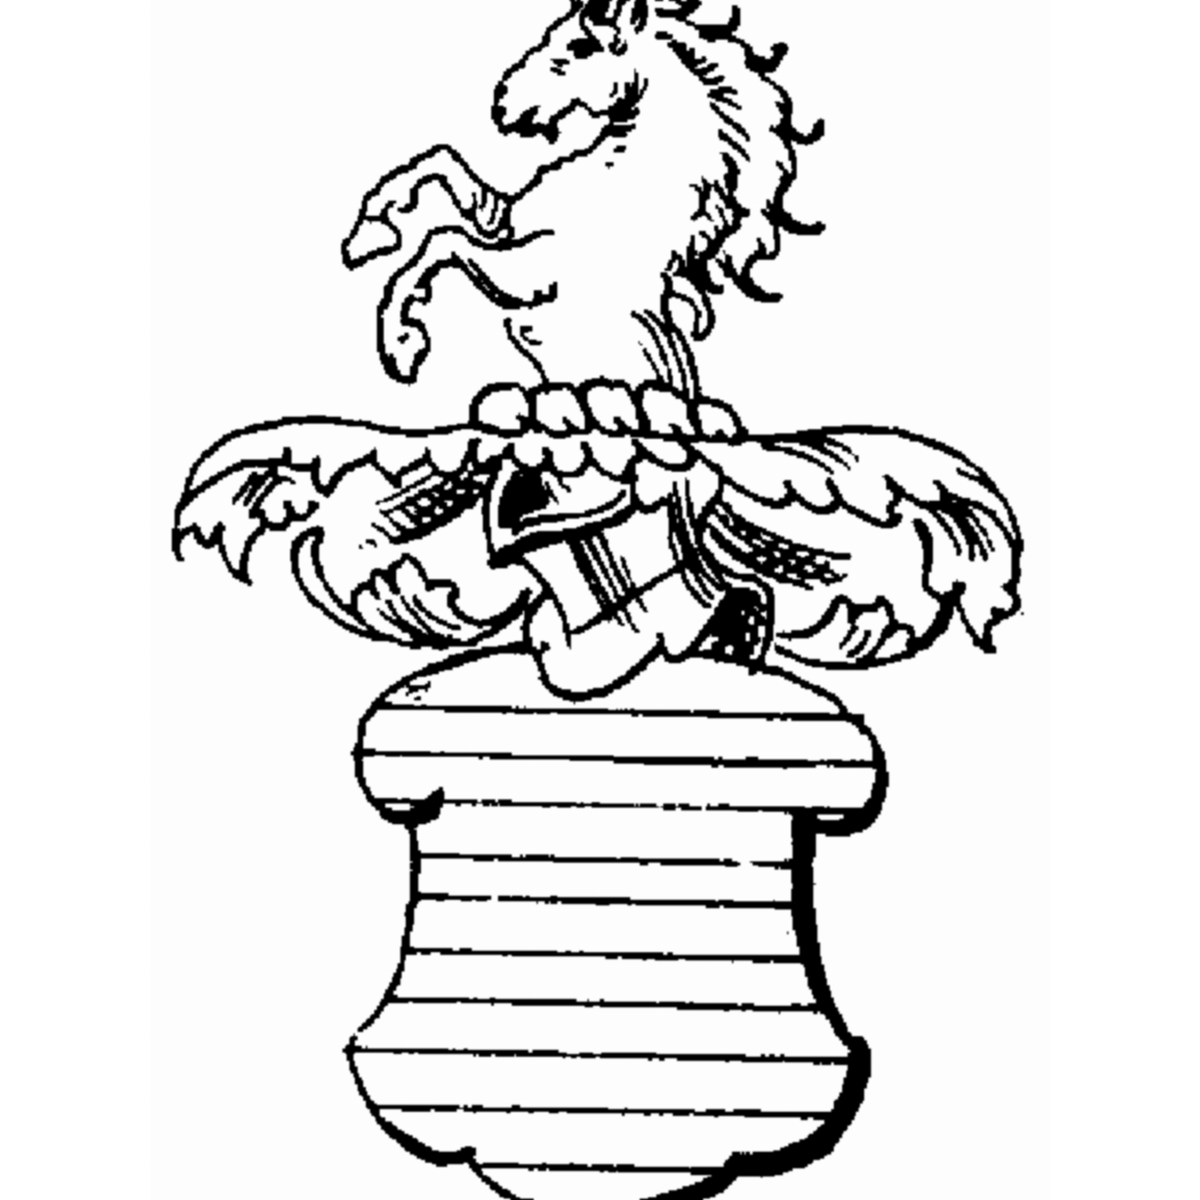 Coat of arms of family Prior